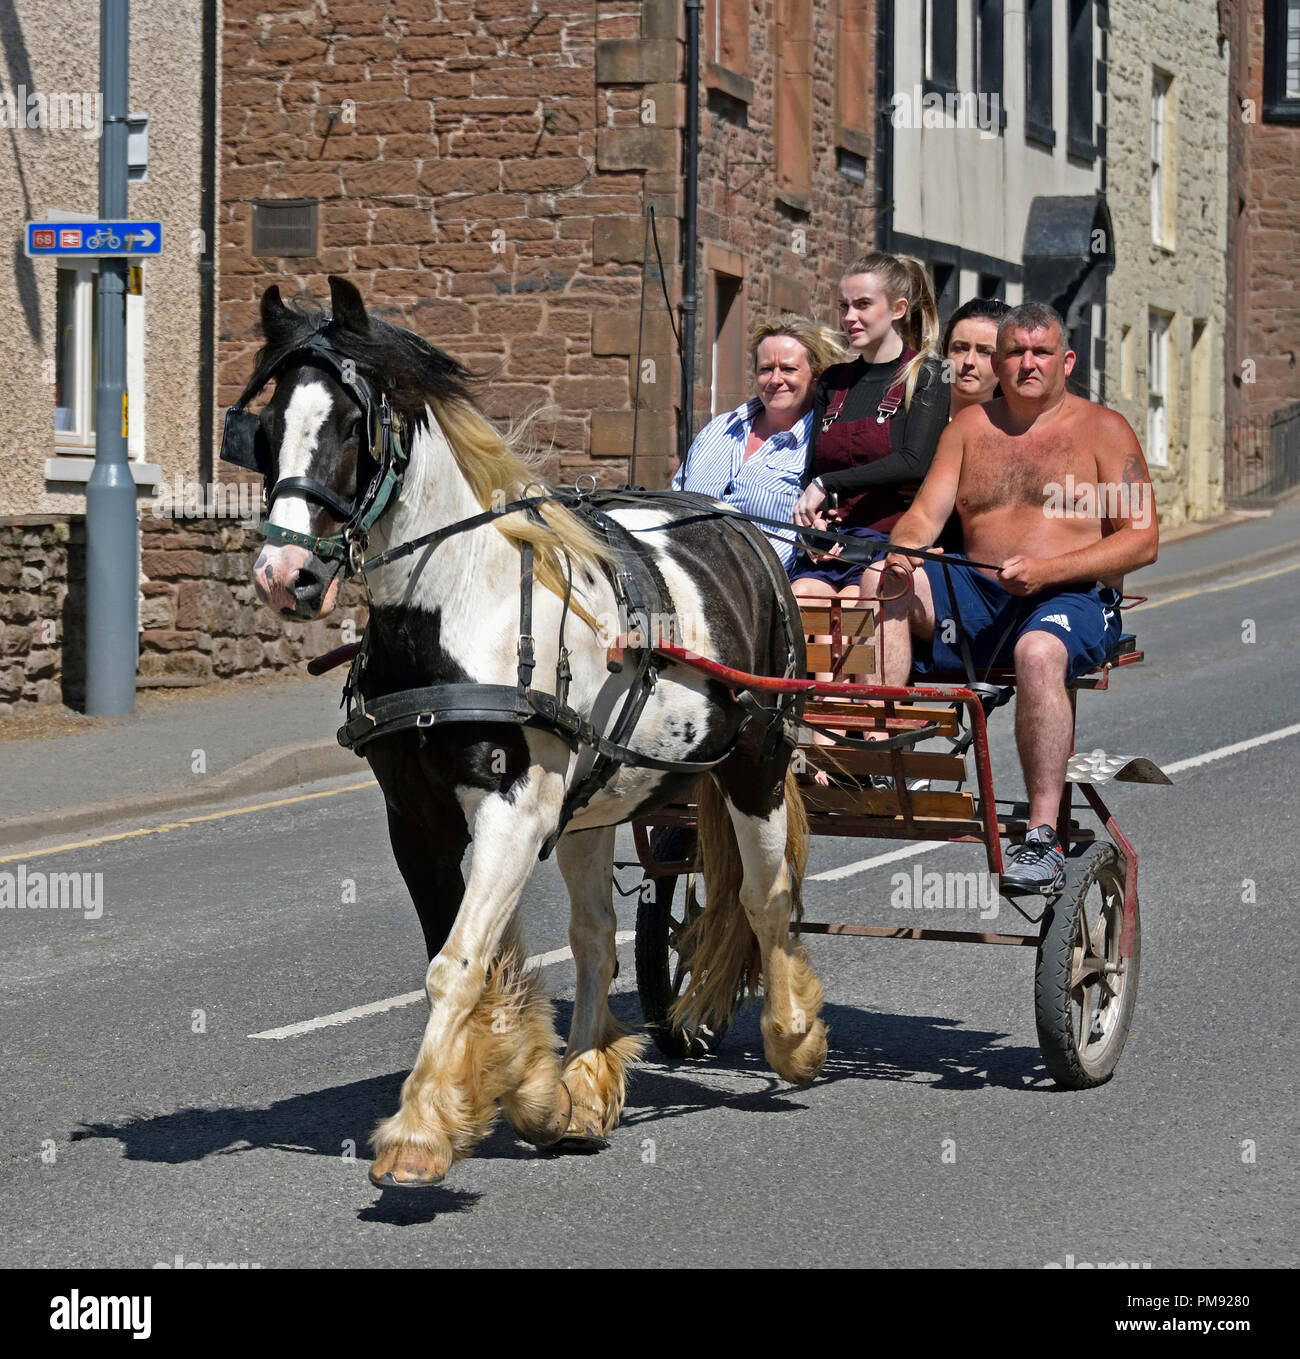 Gypsy Traveller family riding on trotting cart. Appleby Horse Fair 2018. The Sands, Appleby-in-Westmorland, Cumbria, England, United Kingdom, Europe. Stock Photo